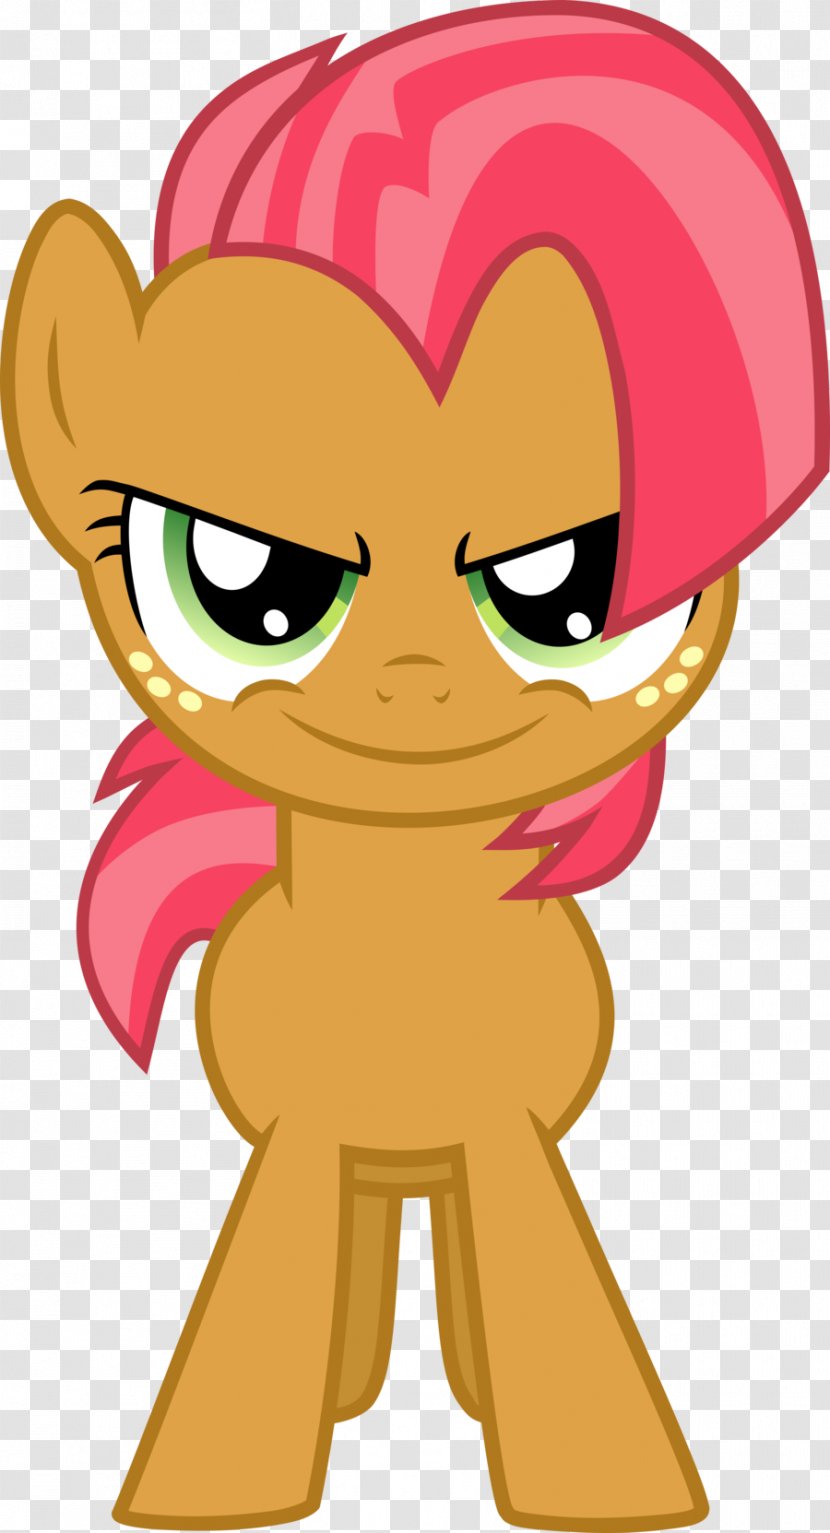 Babs Seed Pony Song Cutie Mark Crusaders - Cartoon Transparent PNG